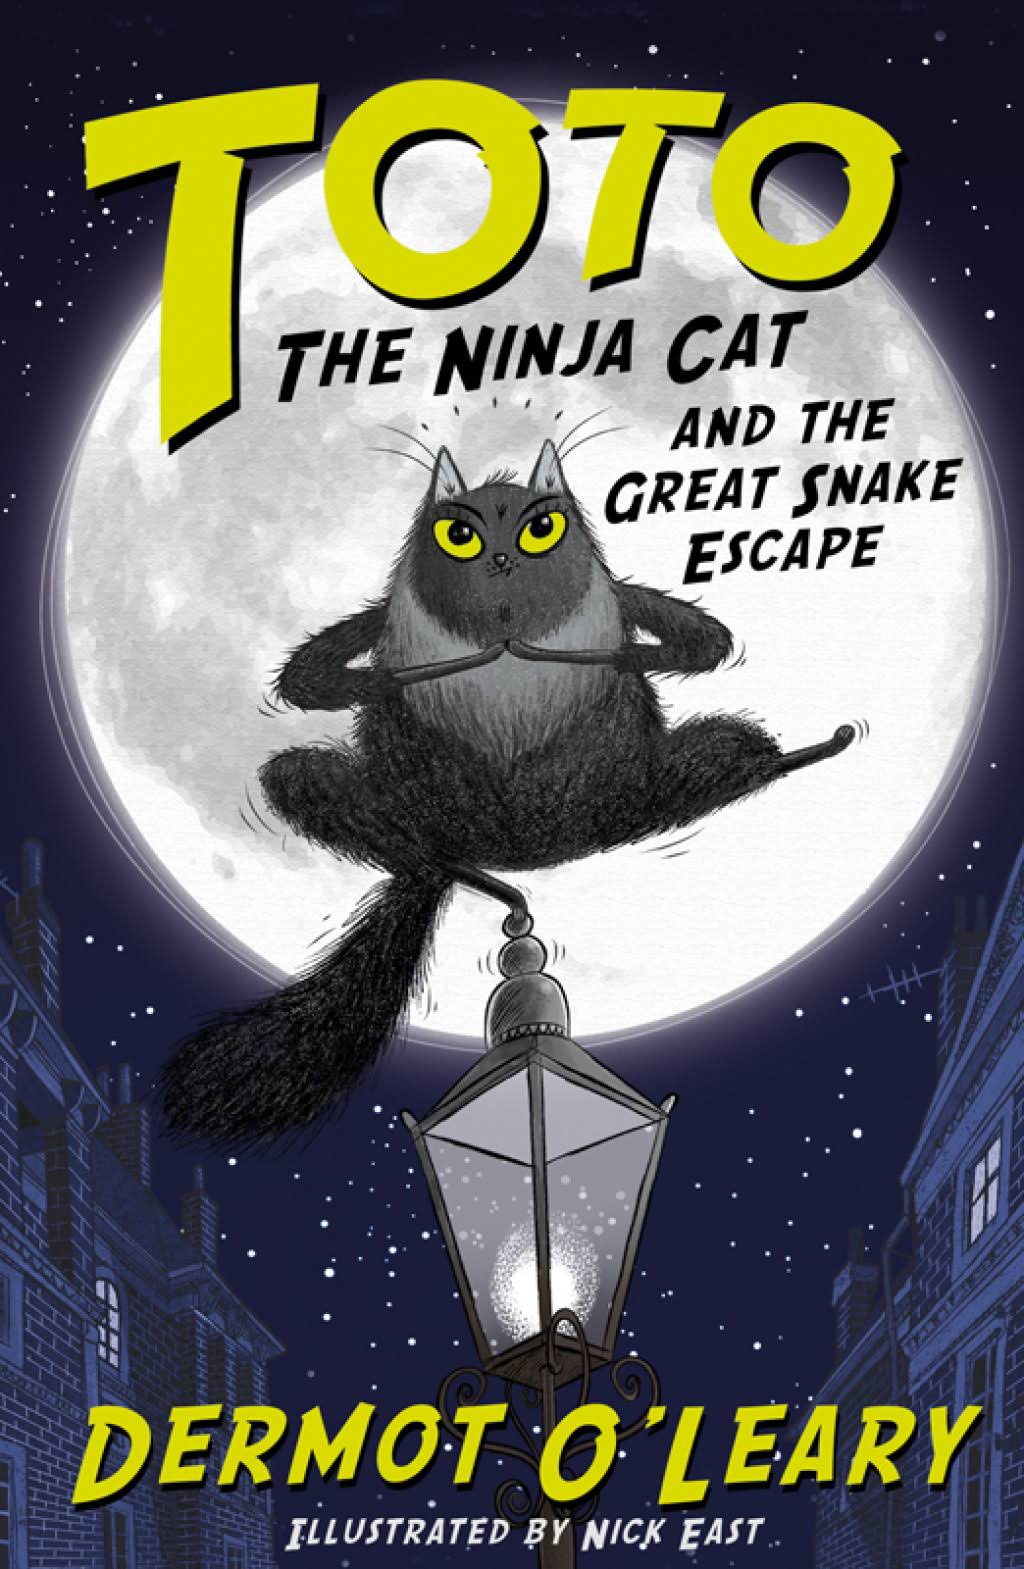 Toto The Ninja Cat and The Great Snake Escape - Dermot O'Leary